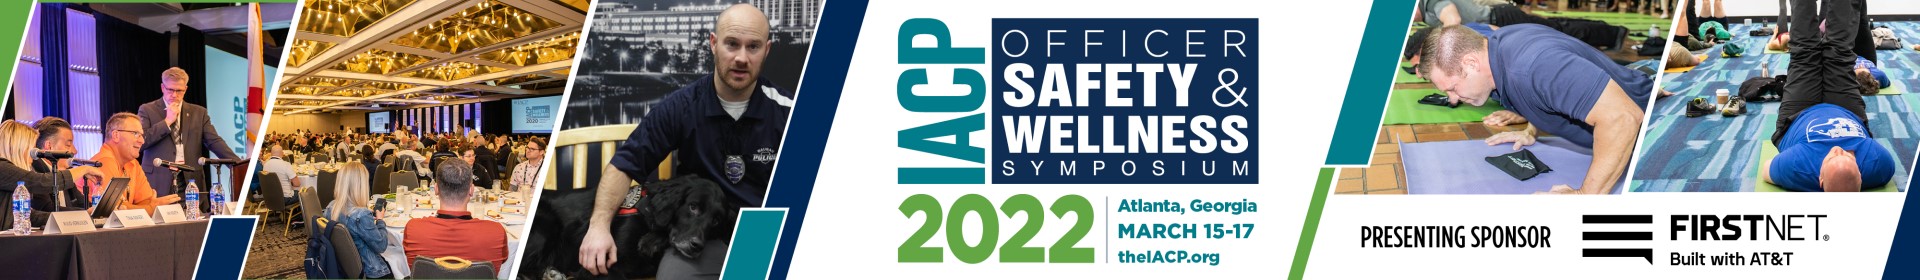 Officer Safety and Wellness Symposium 2022 Event Banner